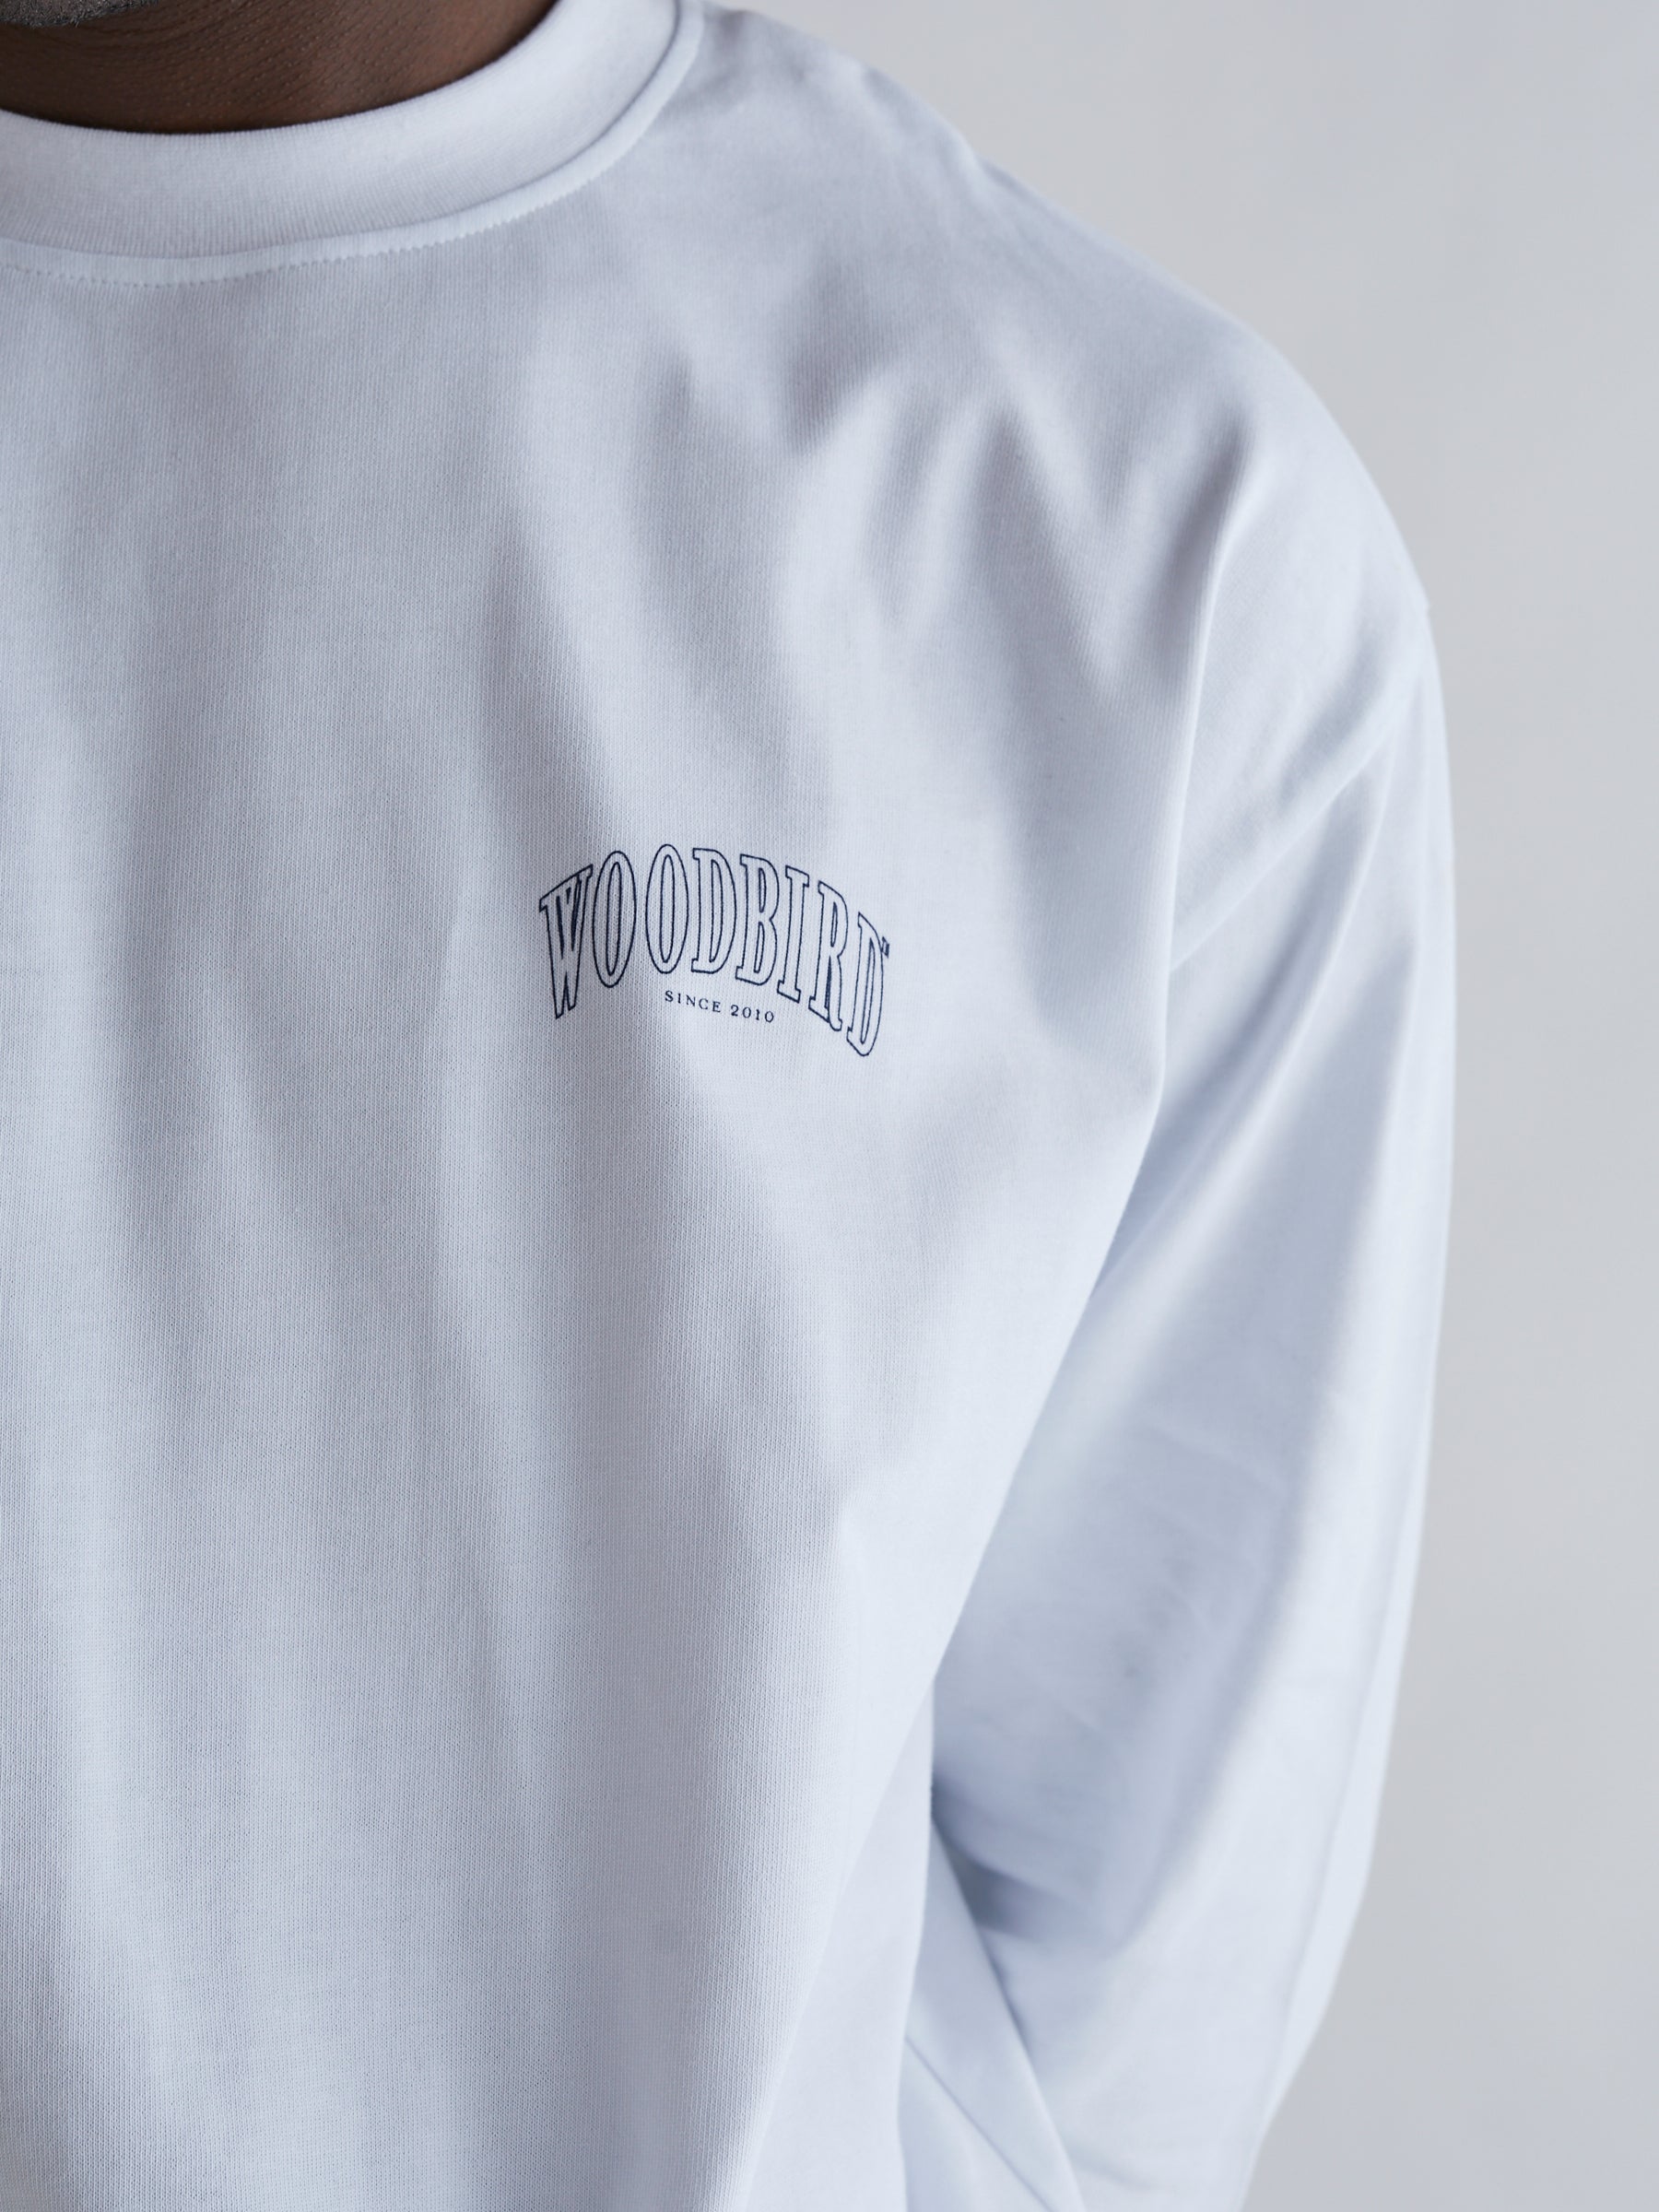 Woodbird Hanes Over L/S Tee T-Shirts White